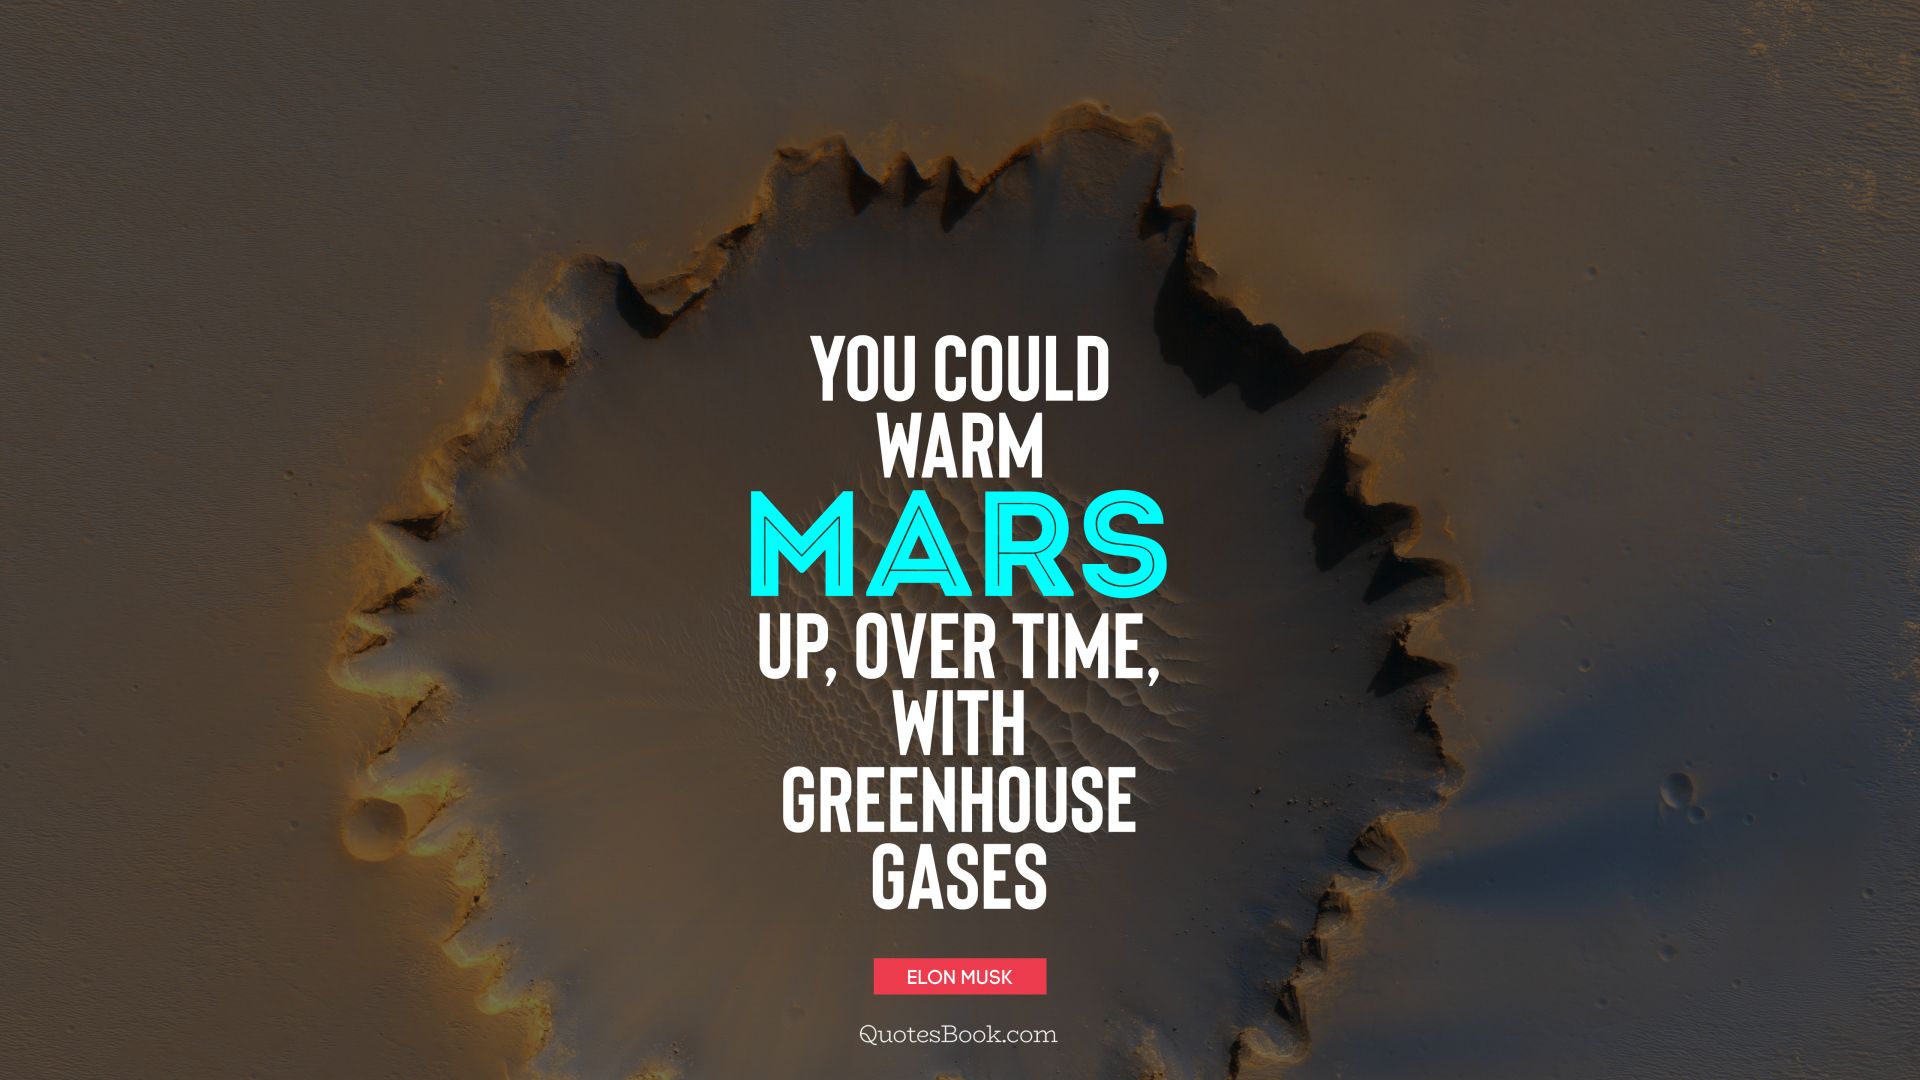 You could warm Mars up, over time, with greenhouse gases. - Quote by Elon Musk